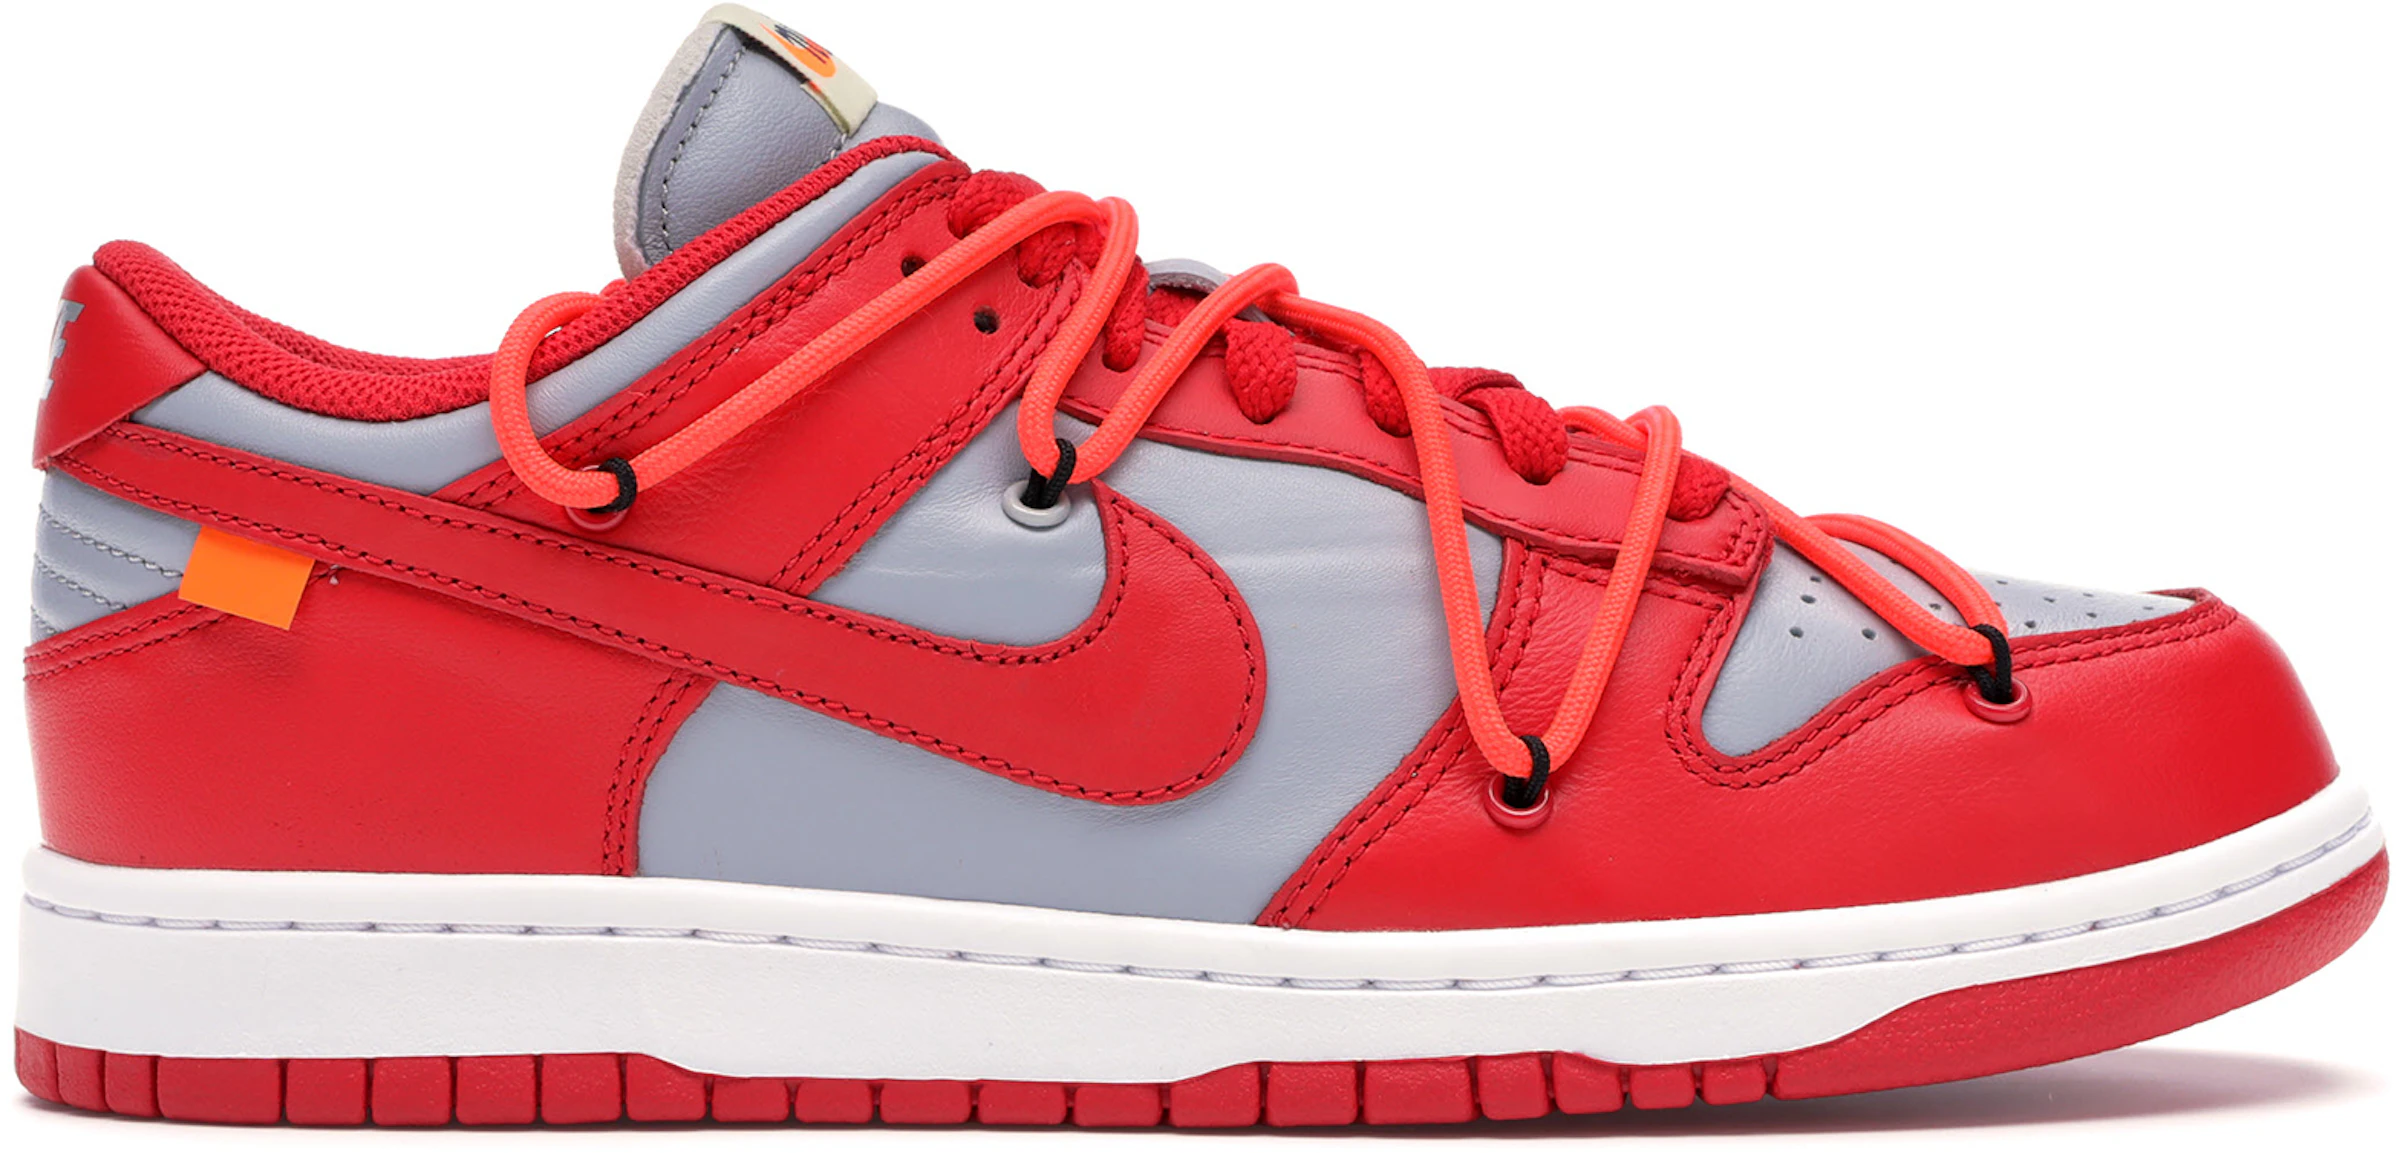 Dunk Low Off-White University Red - CT0856-600 - US